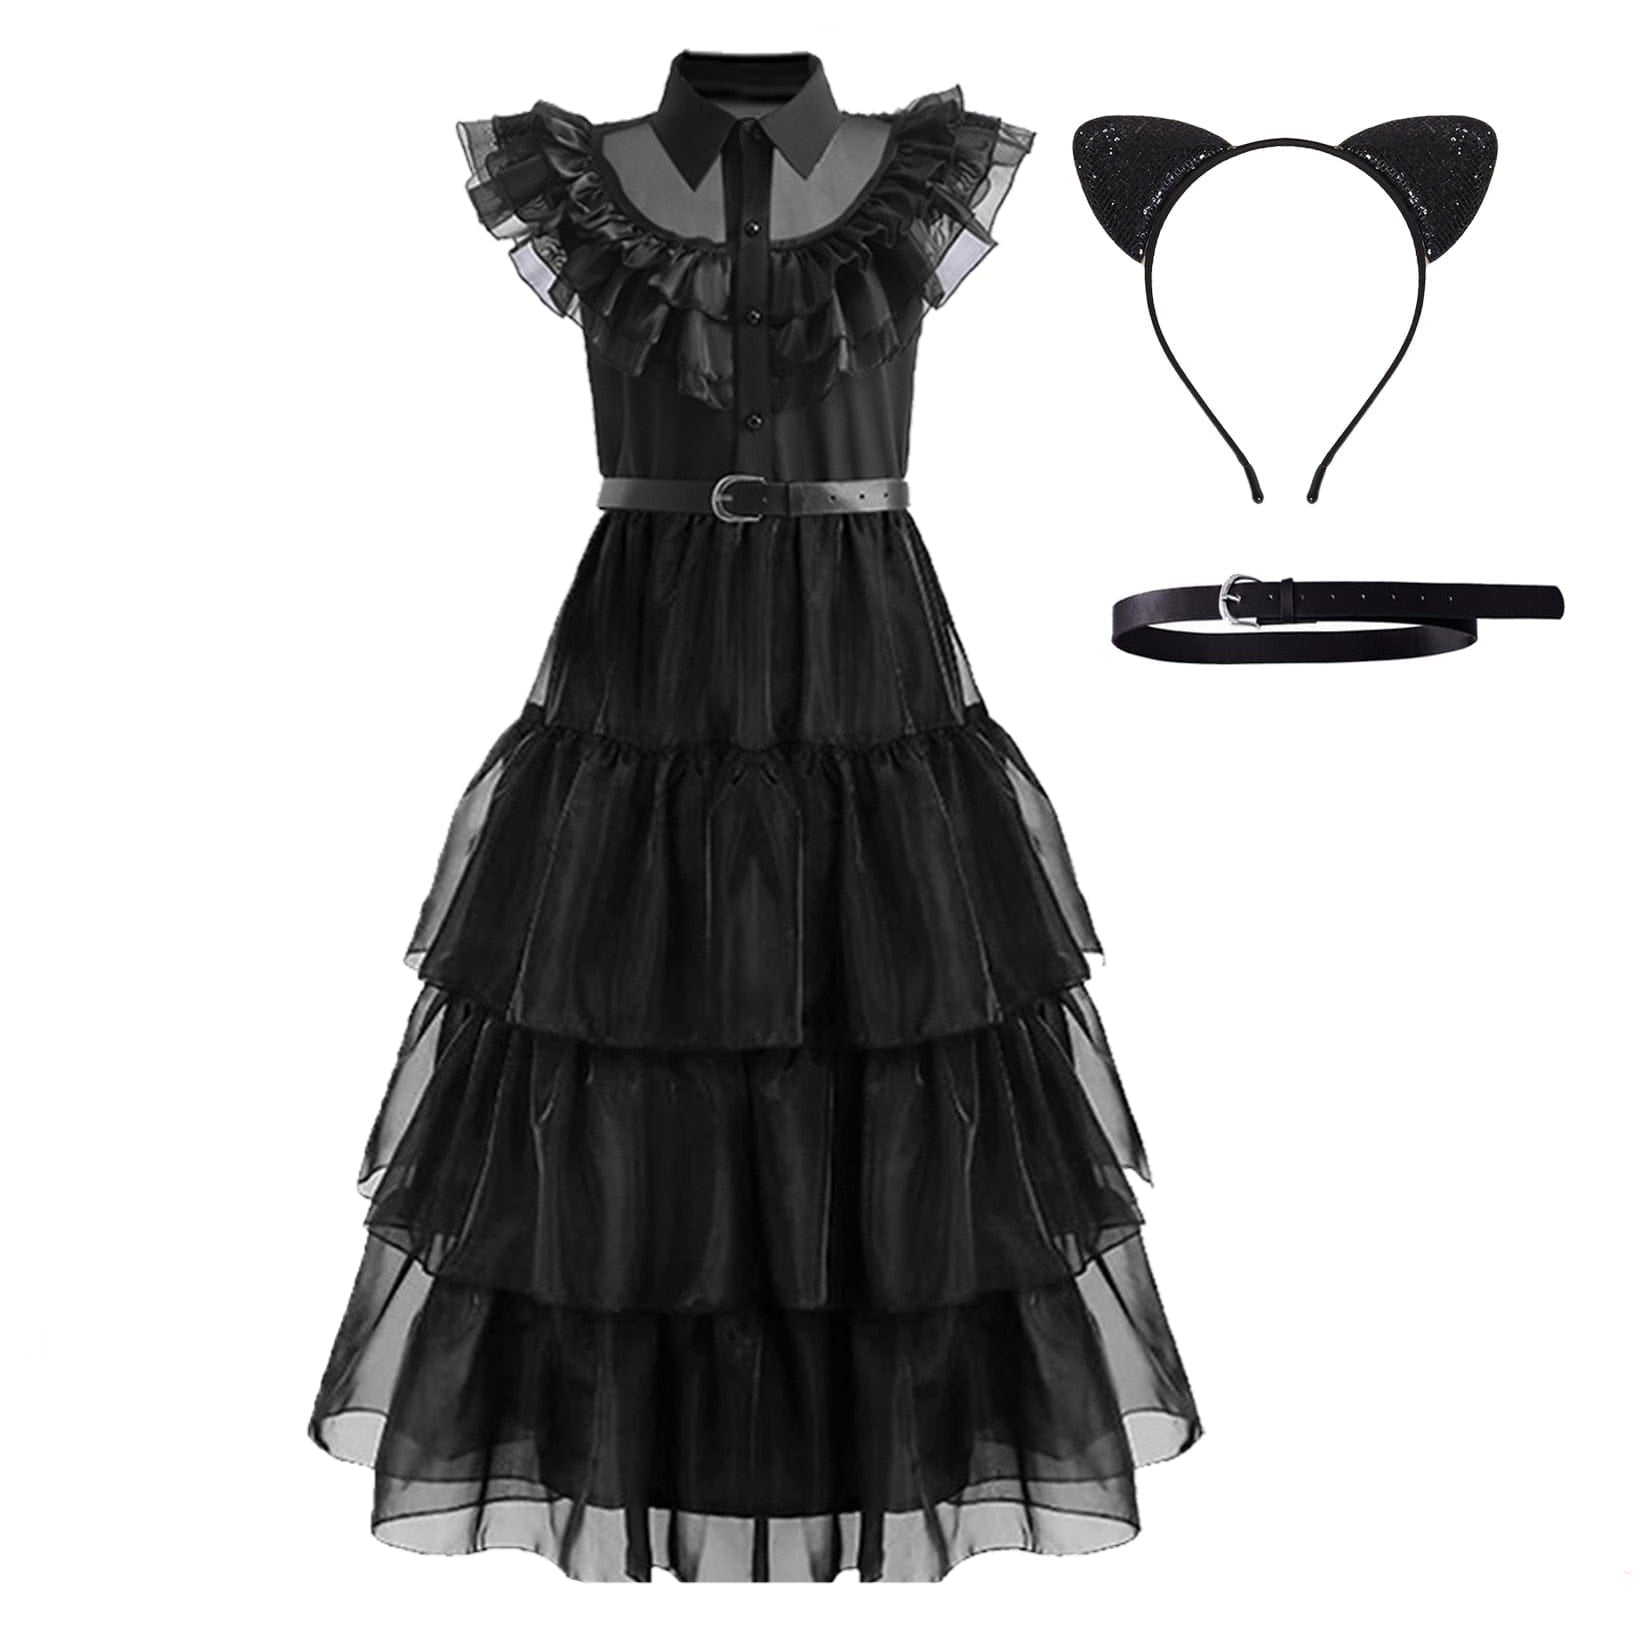 whatagift.com.au 5T 110 / dress belt headwear Wednesday Addams Cosplay Costume For Carnival Halloween For Girl